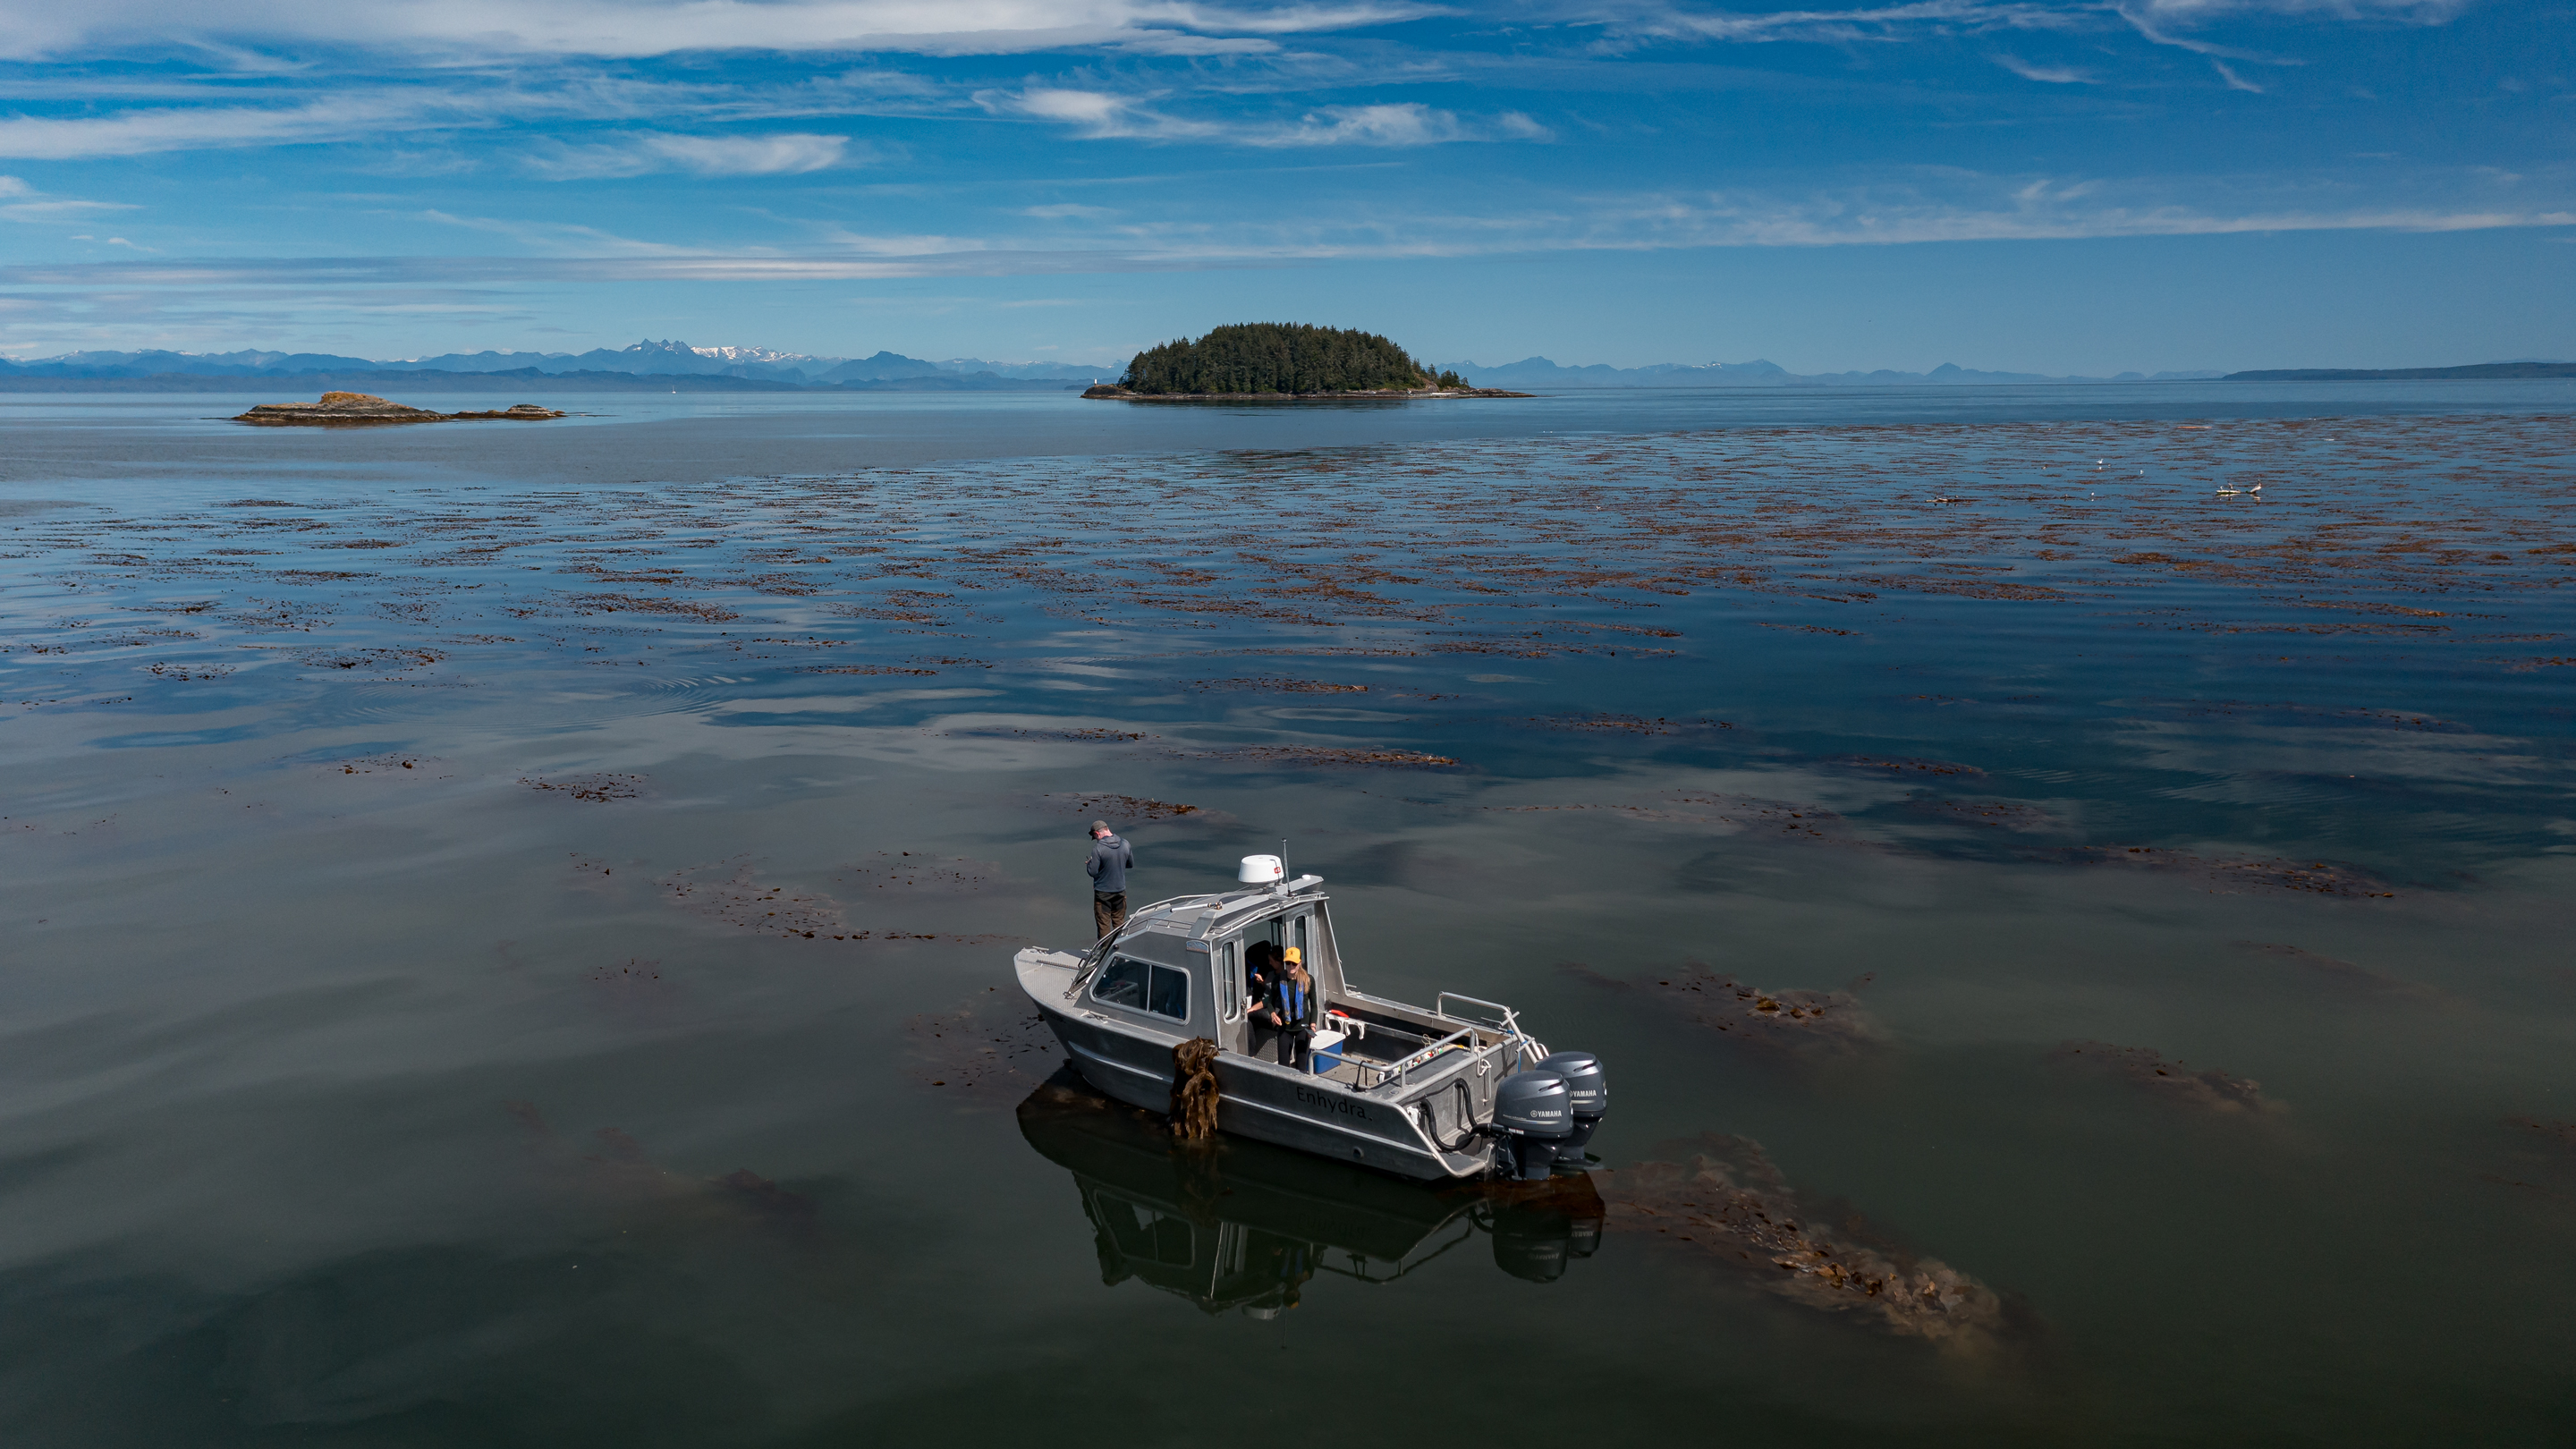 A small fishing boat sits in a vast ocean scene, near a large kelp bed. Small islands dot the distance.